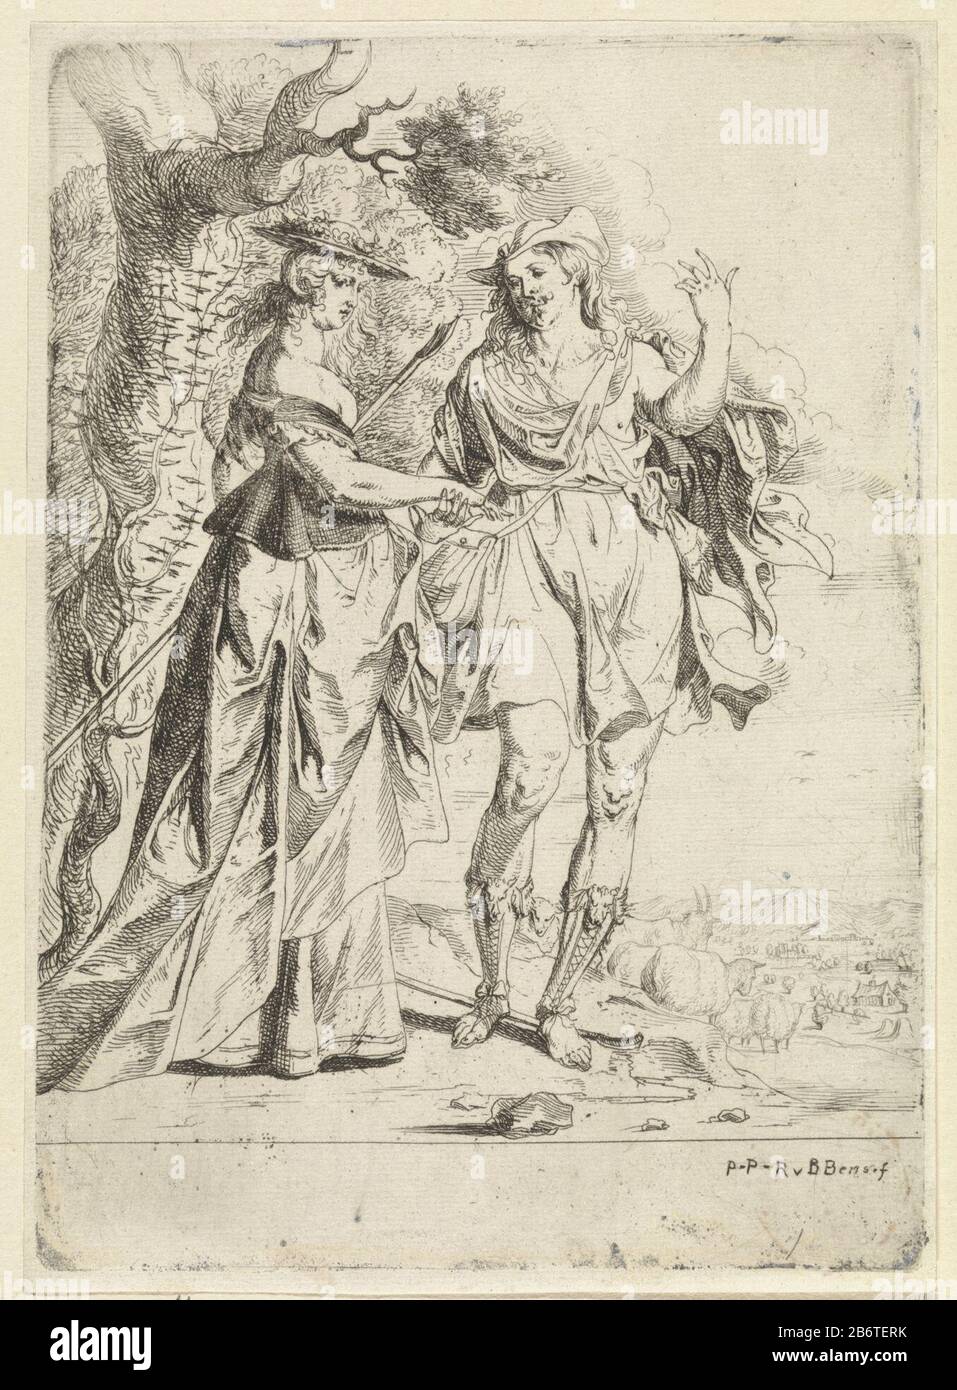 Herderspaar staande voor een boom A shepherd and shepherdess stand hand in hand with a tree. In the background cattle in landschap. Manufacturer : printmaker Jan Thomas to design: Peter Paul Rubens (listed property) Place manufacture: Antwerp Date: 1627 - 1678 Physical features: etching material: paper Technique: etching Dimensions: plate edge: H 201 mm × W 145 mm Subject: pastorals, Arcadian taferelenherding, herdsman, herdswoman, shepherd, shepherdess, cowherd, etc.couple or lover Stock Photo